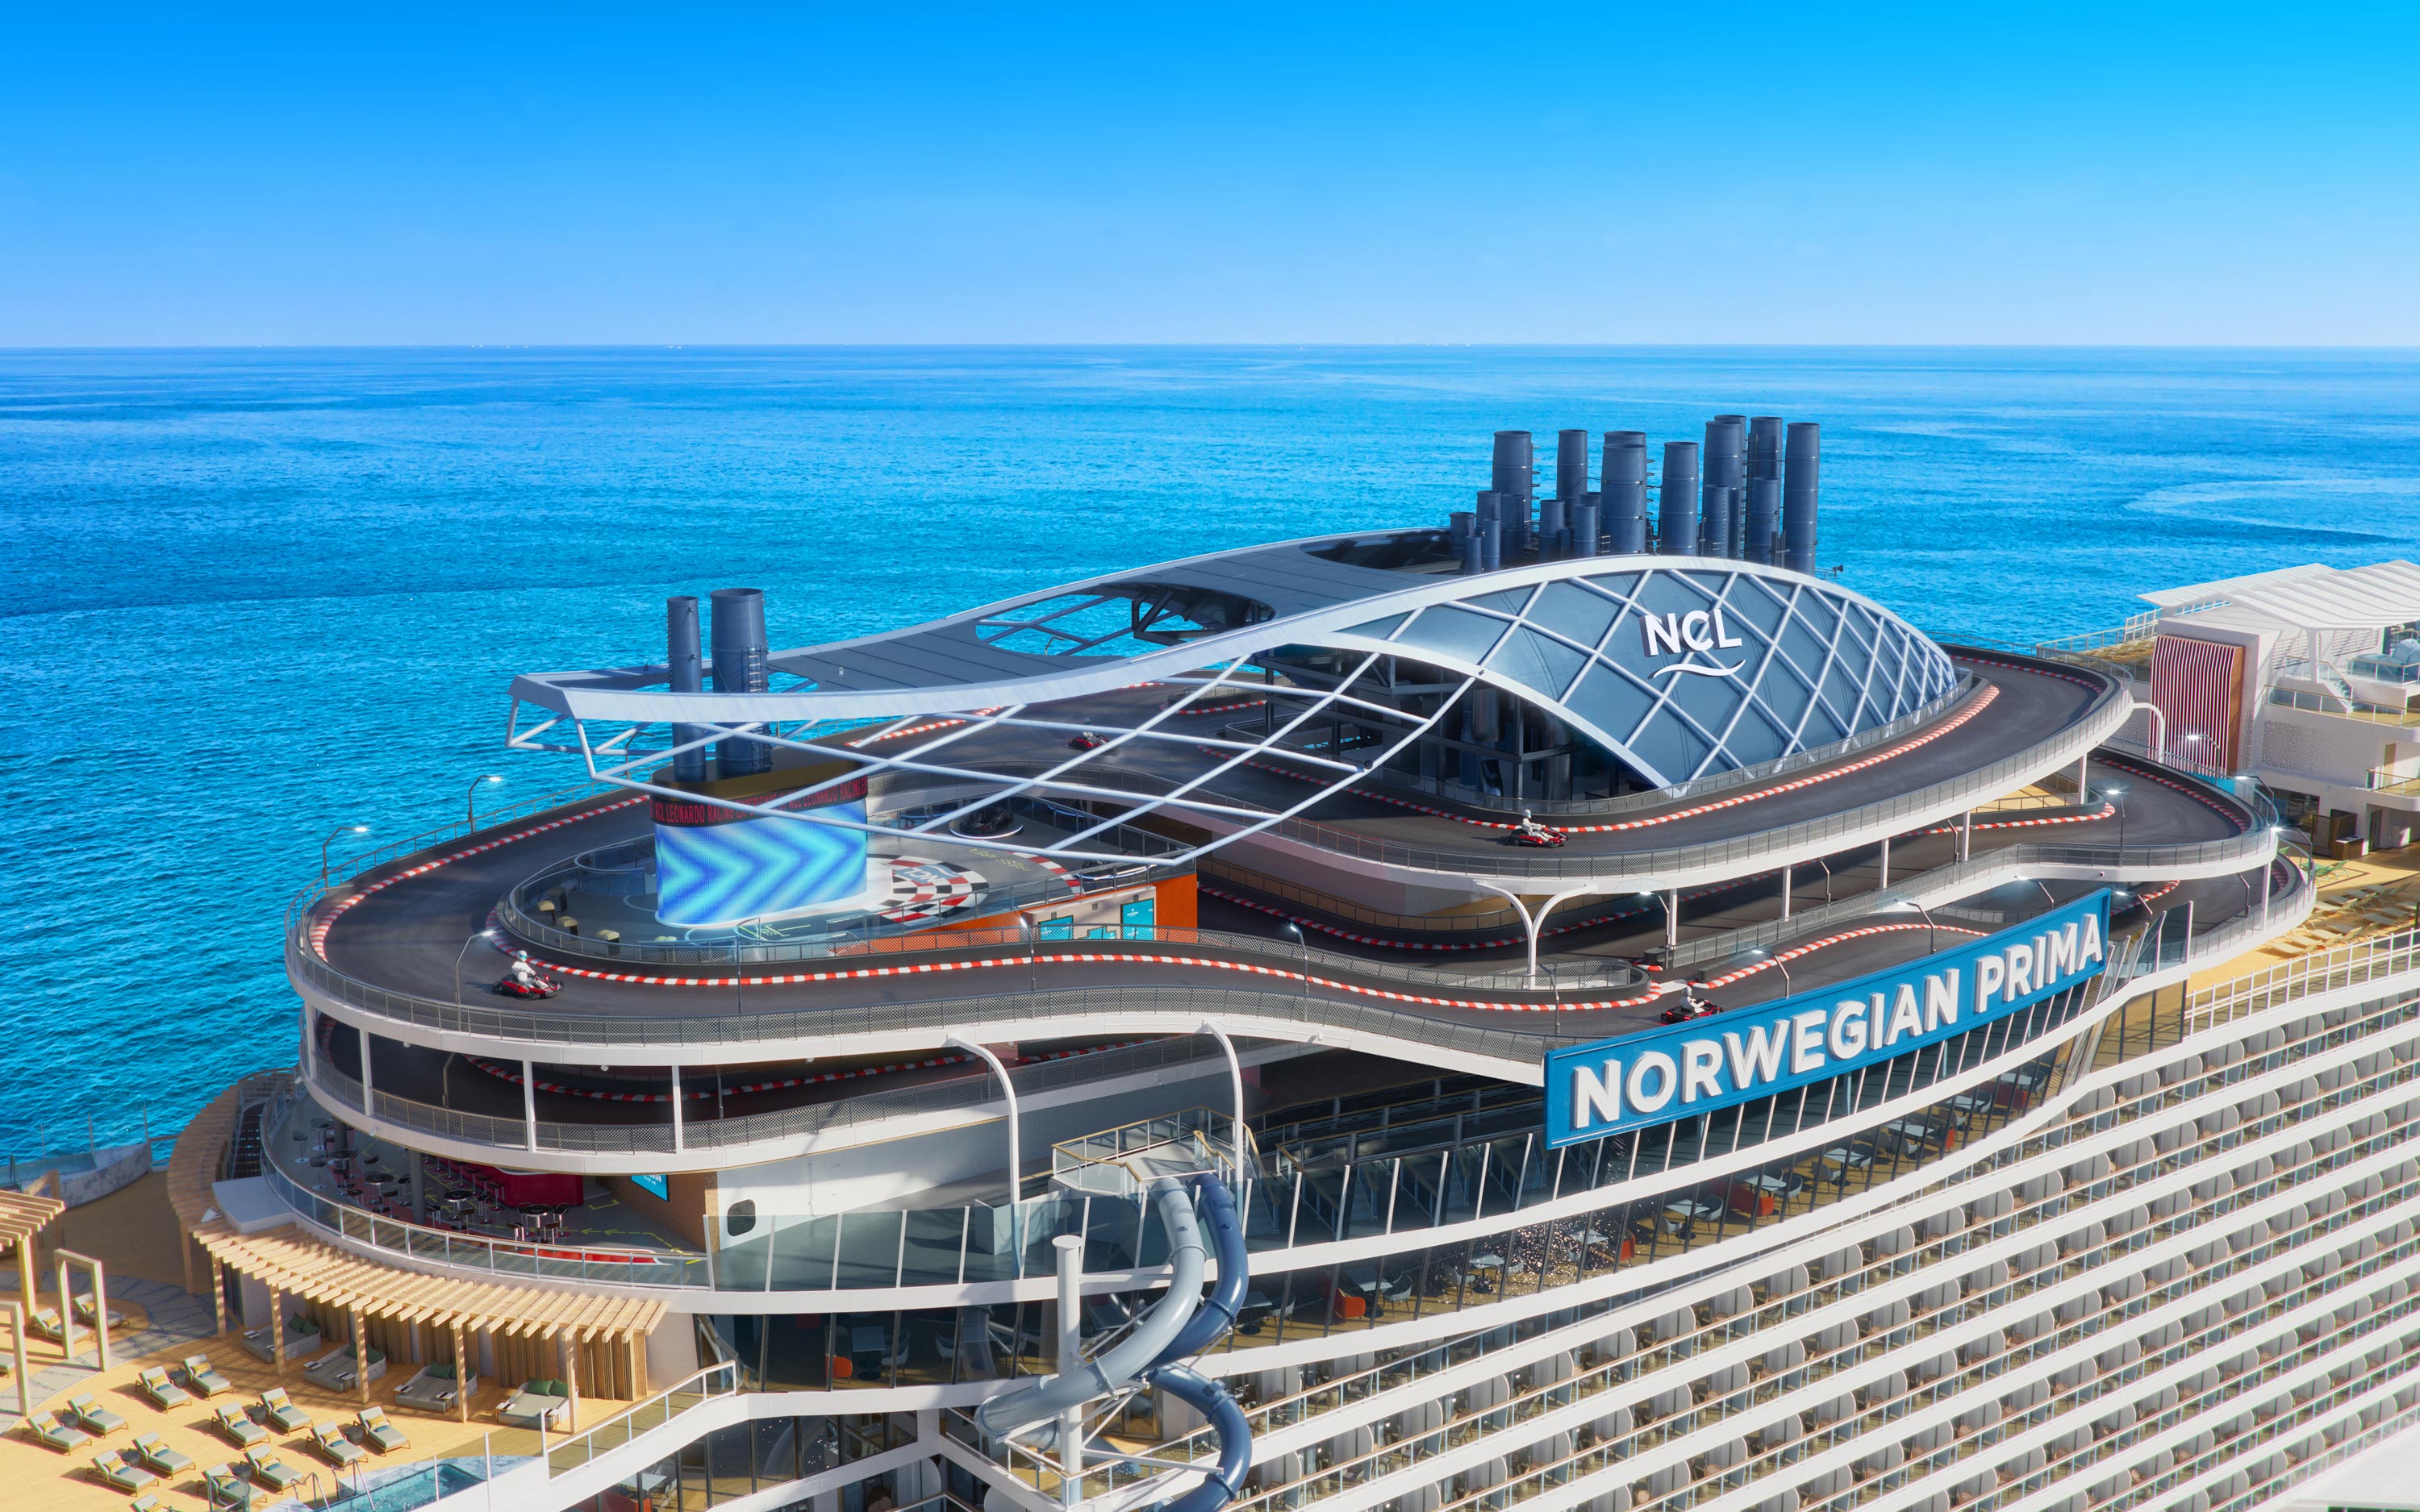 Norwegian Prima: New cruise ship to feature world's first free-fall dry slide at sea and a three-level racetrack | CNN Travel